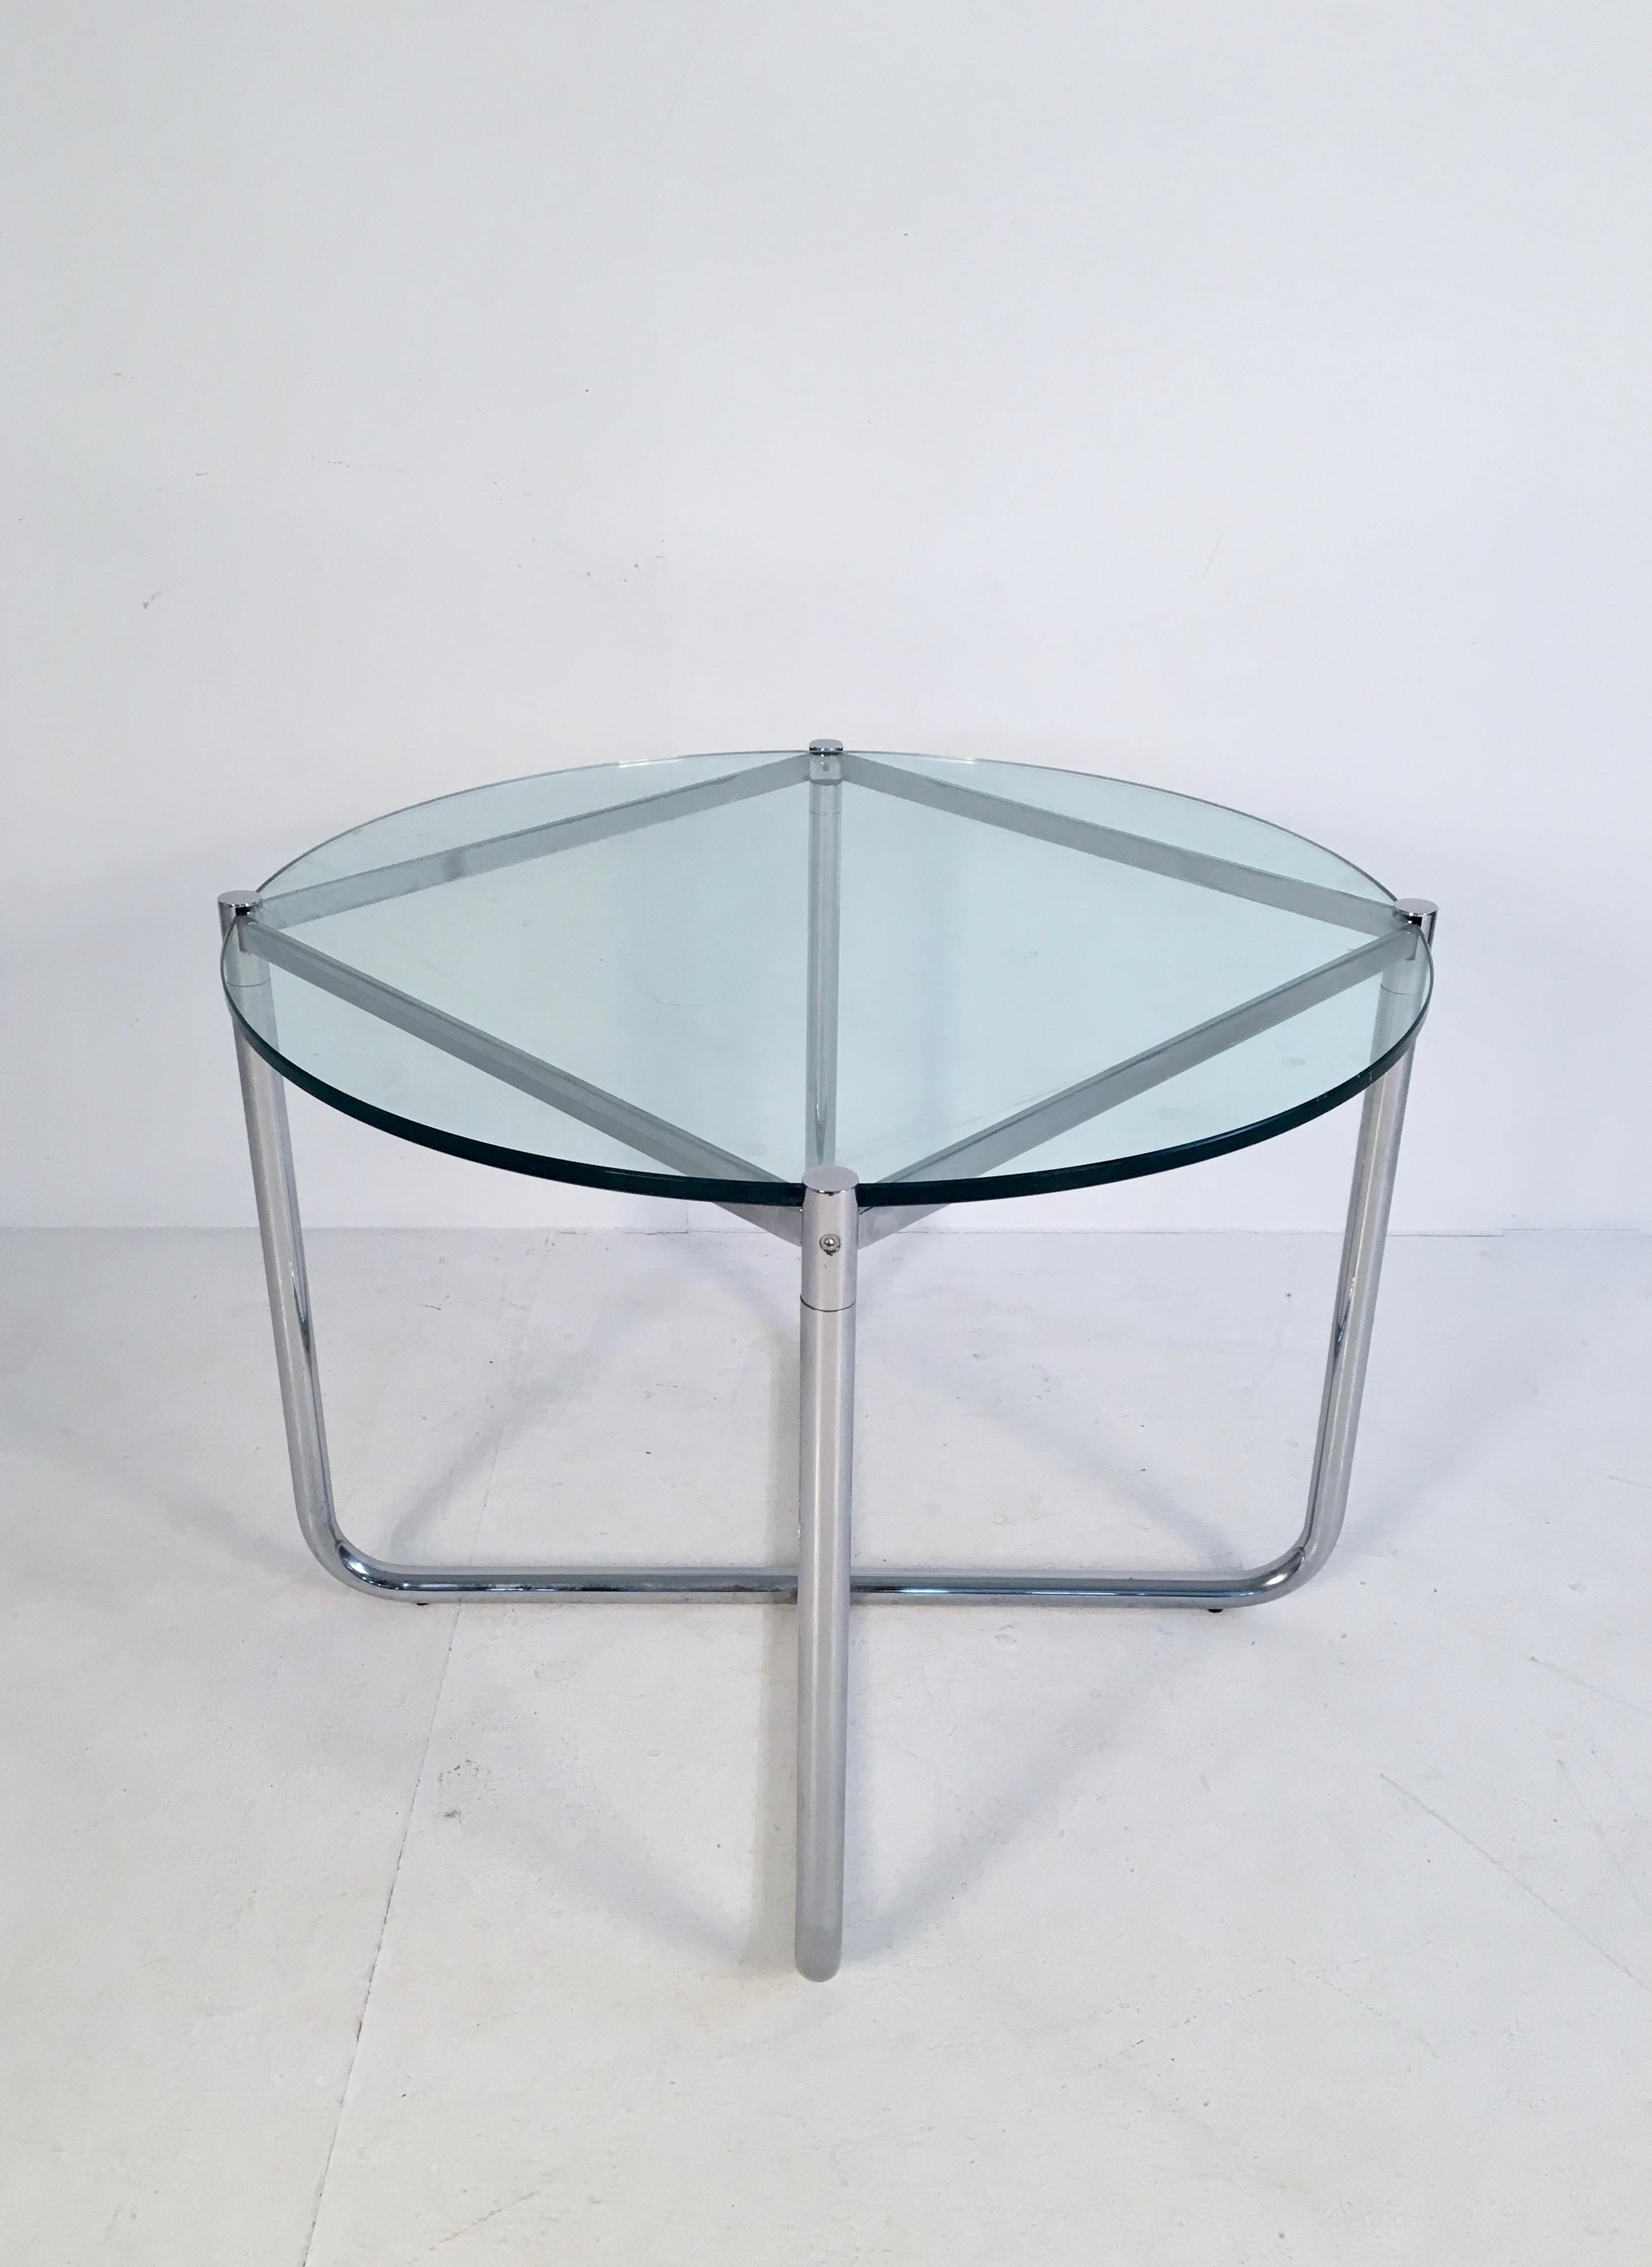 Midcentury Glass and Chrome Side Table by Mies van der Rohe for Knoll circa 1970 In Good Condition For Sale In London, GB